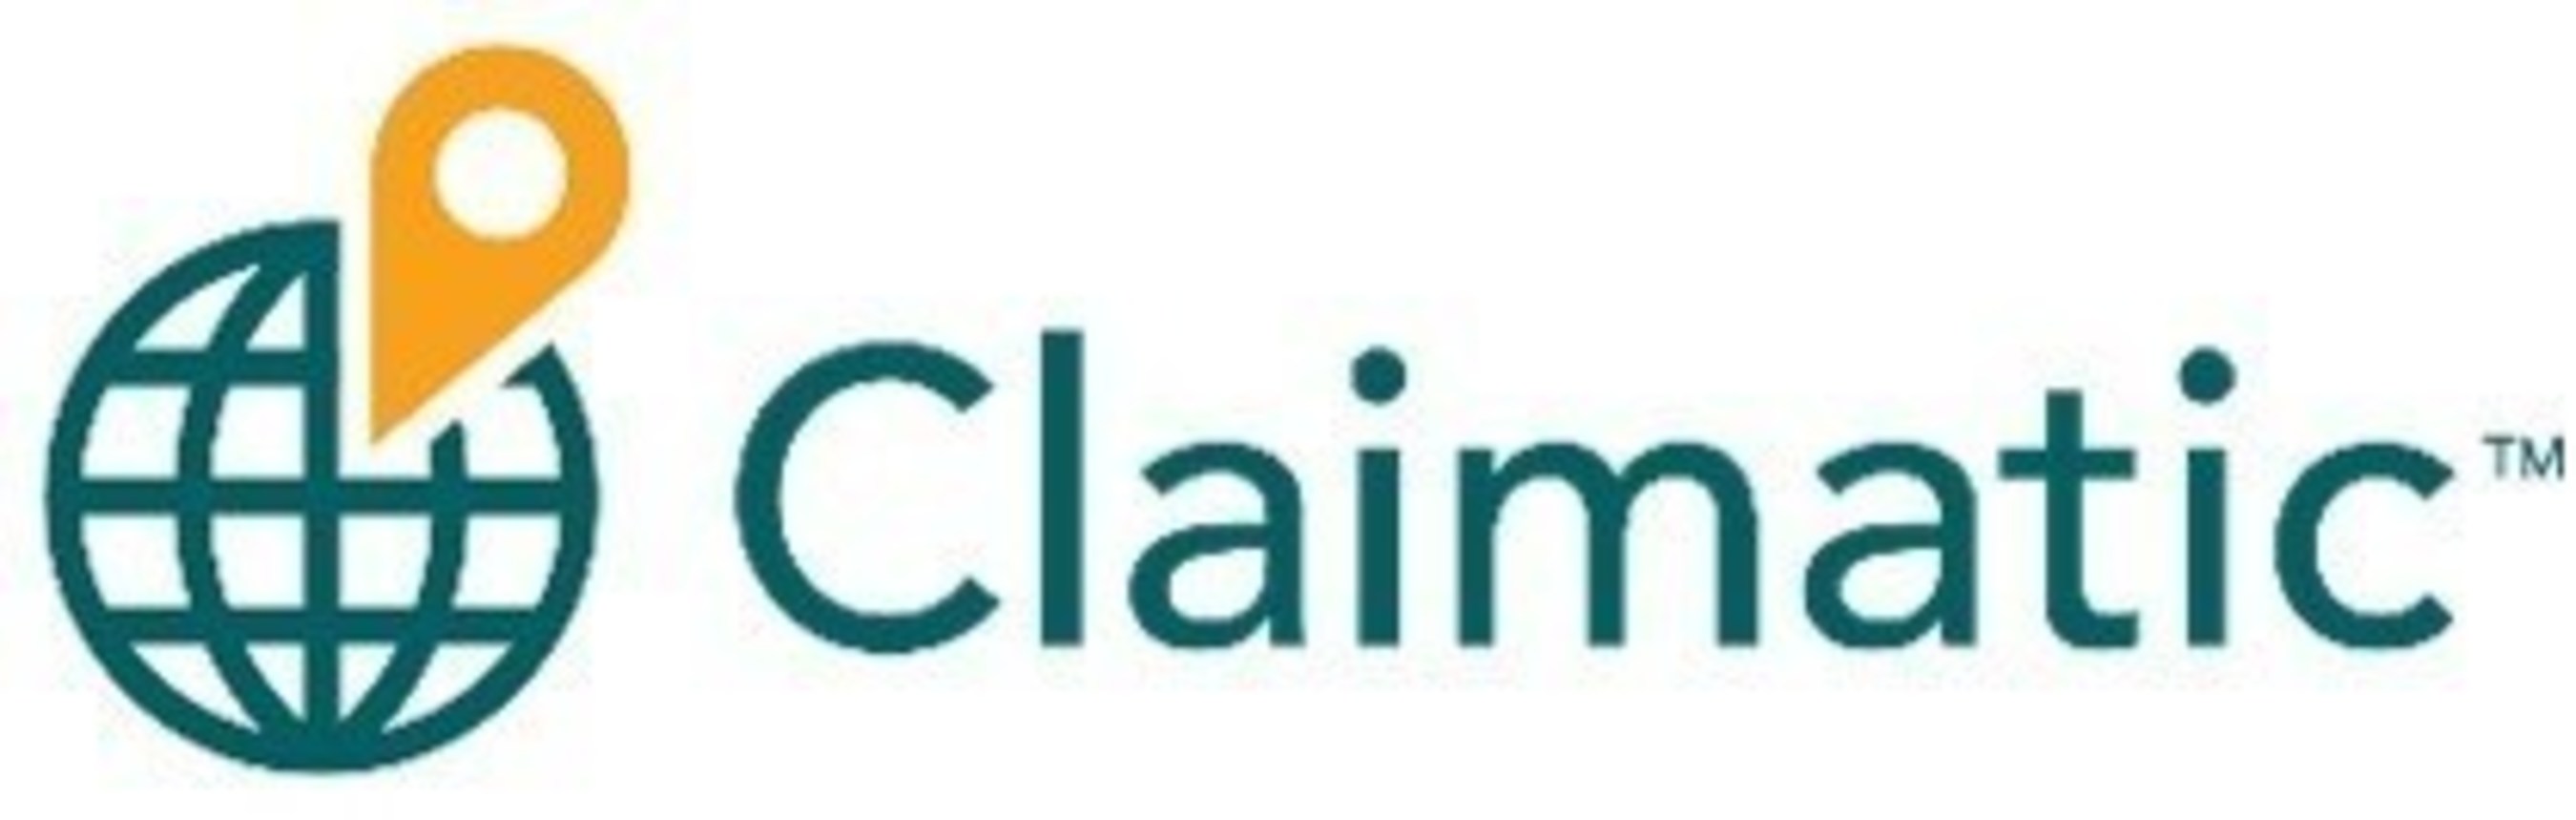 Claimatic Announces Launch of Mobile App That Matches Claims to Field Resources in Real Time Similar to Transportation Networks